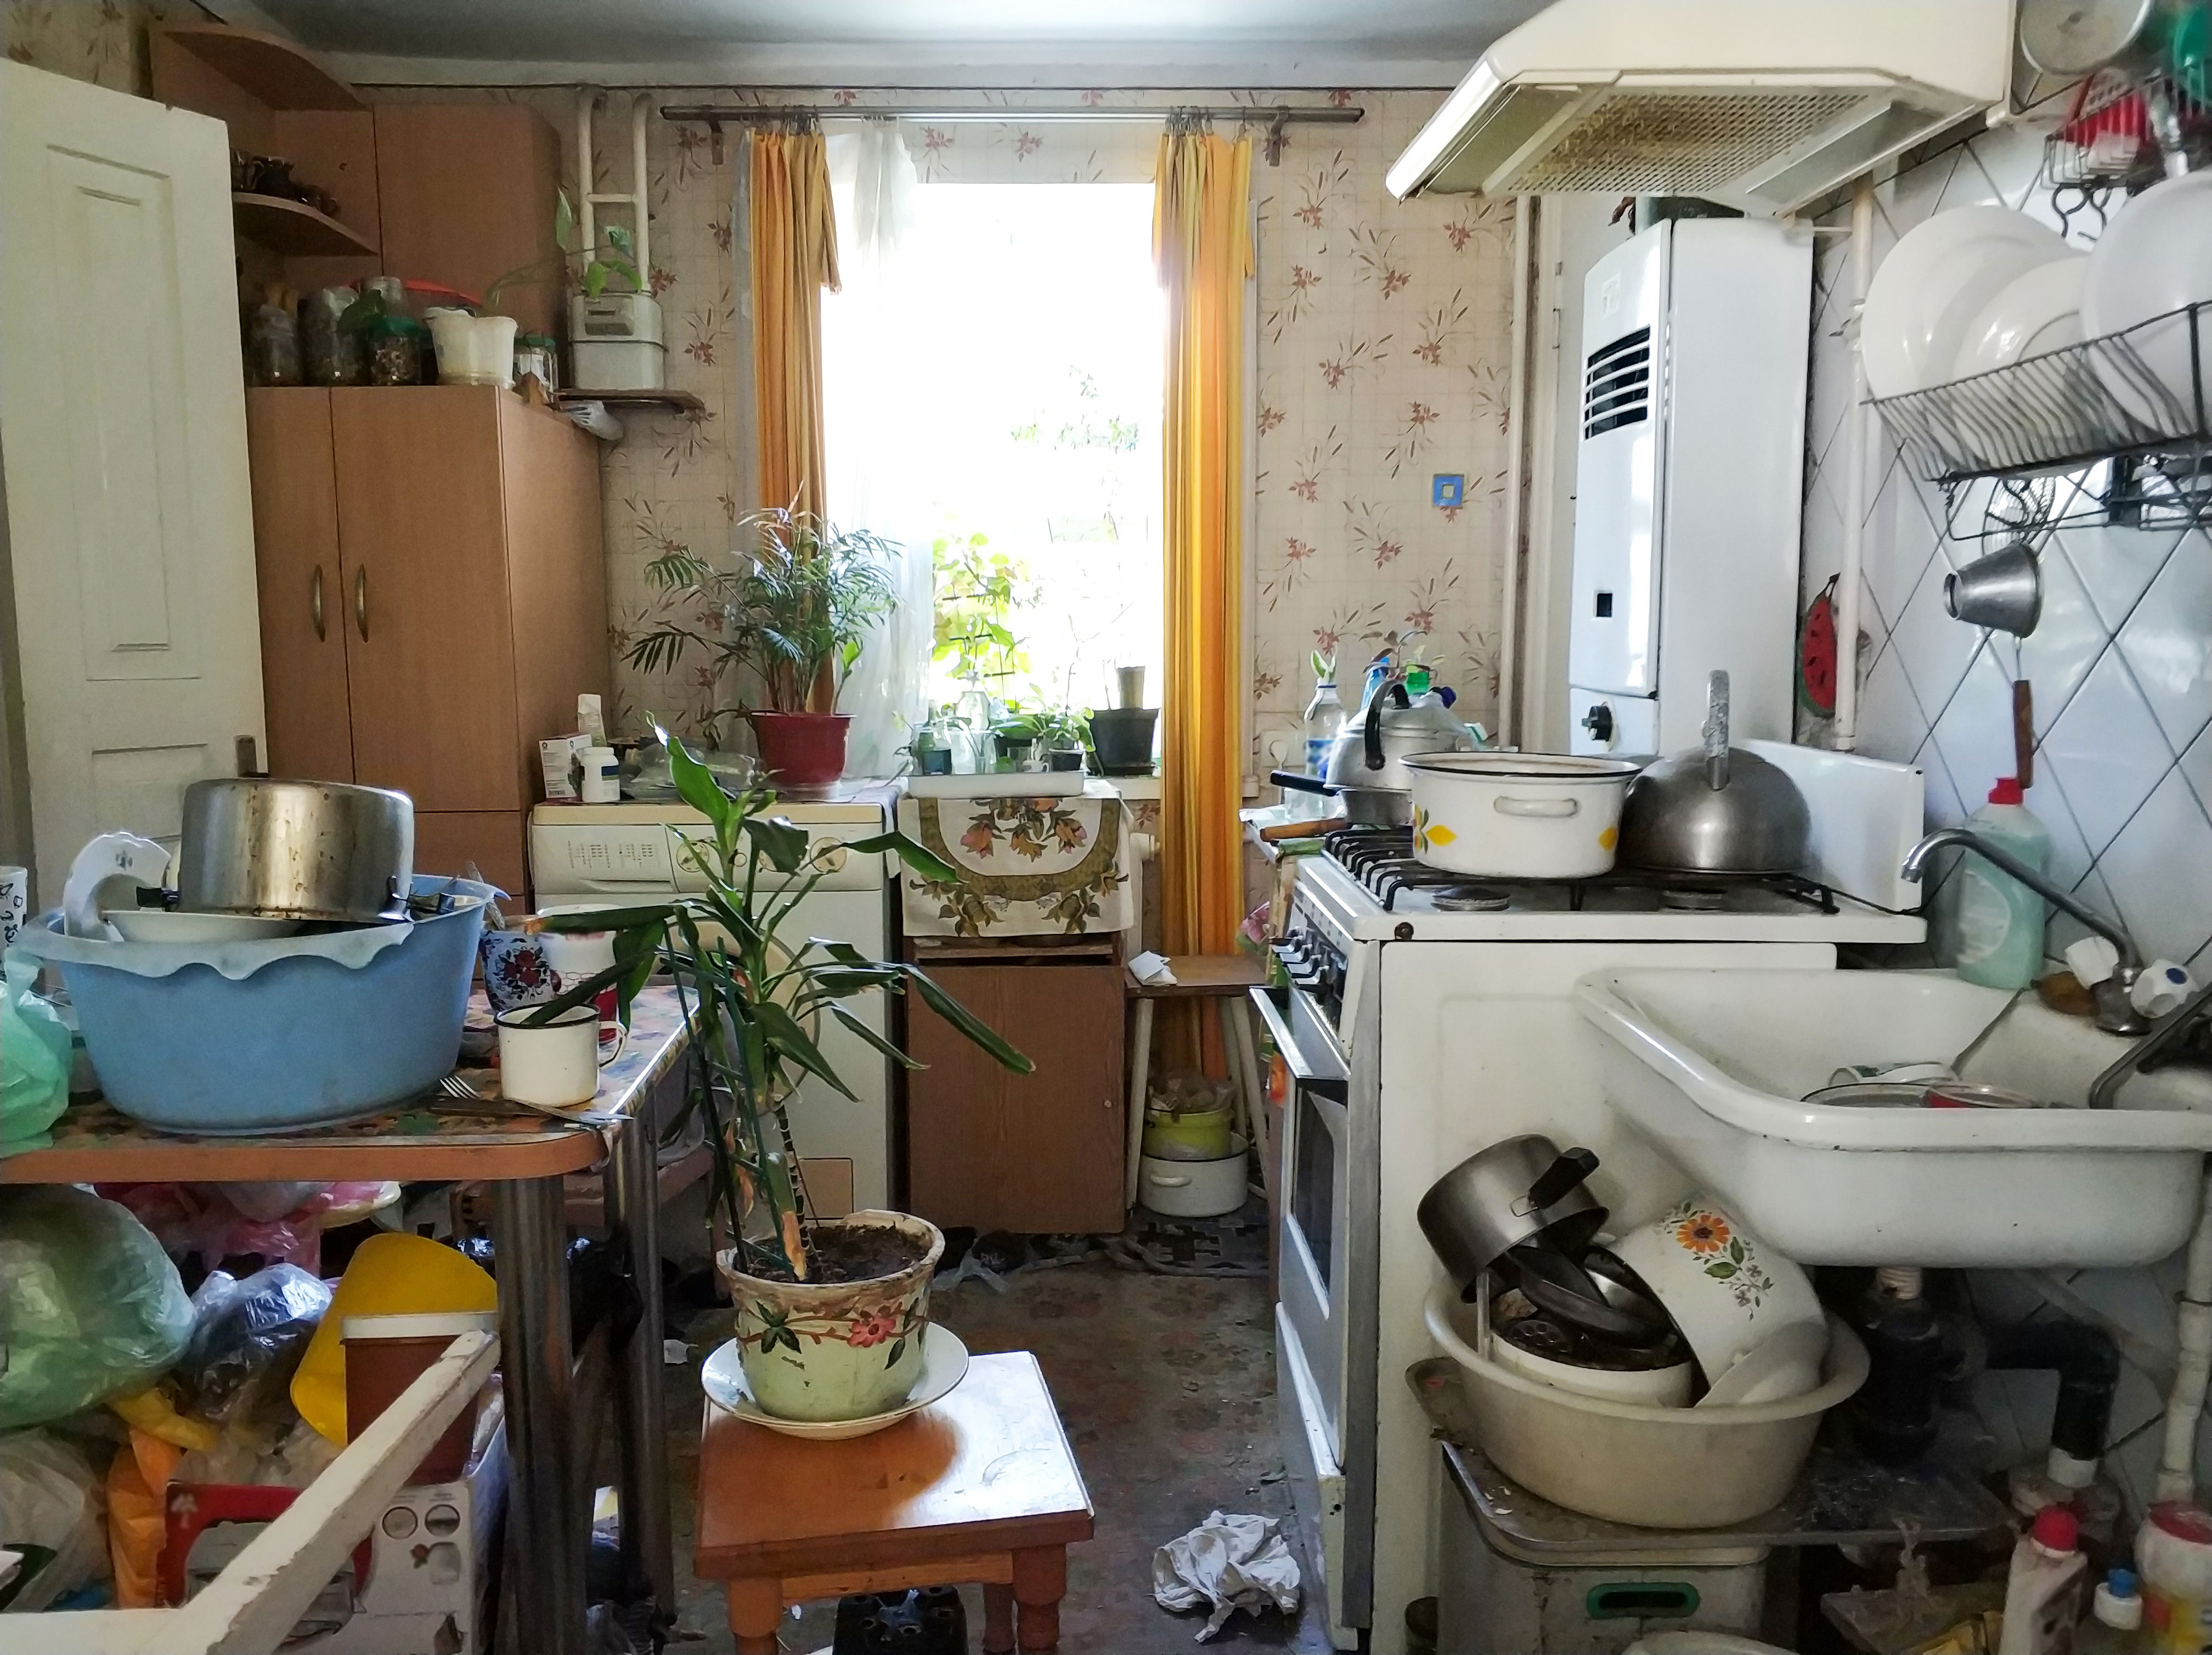 Lots of items in a kitchen